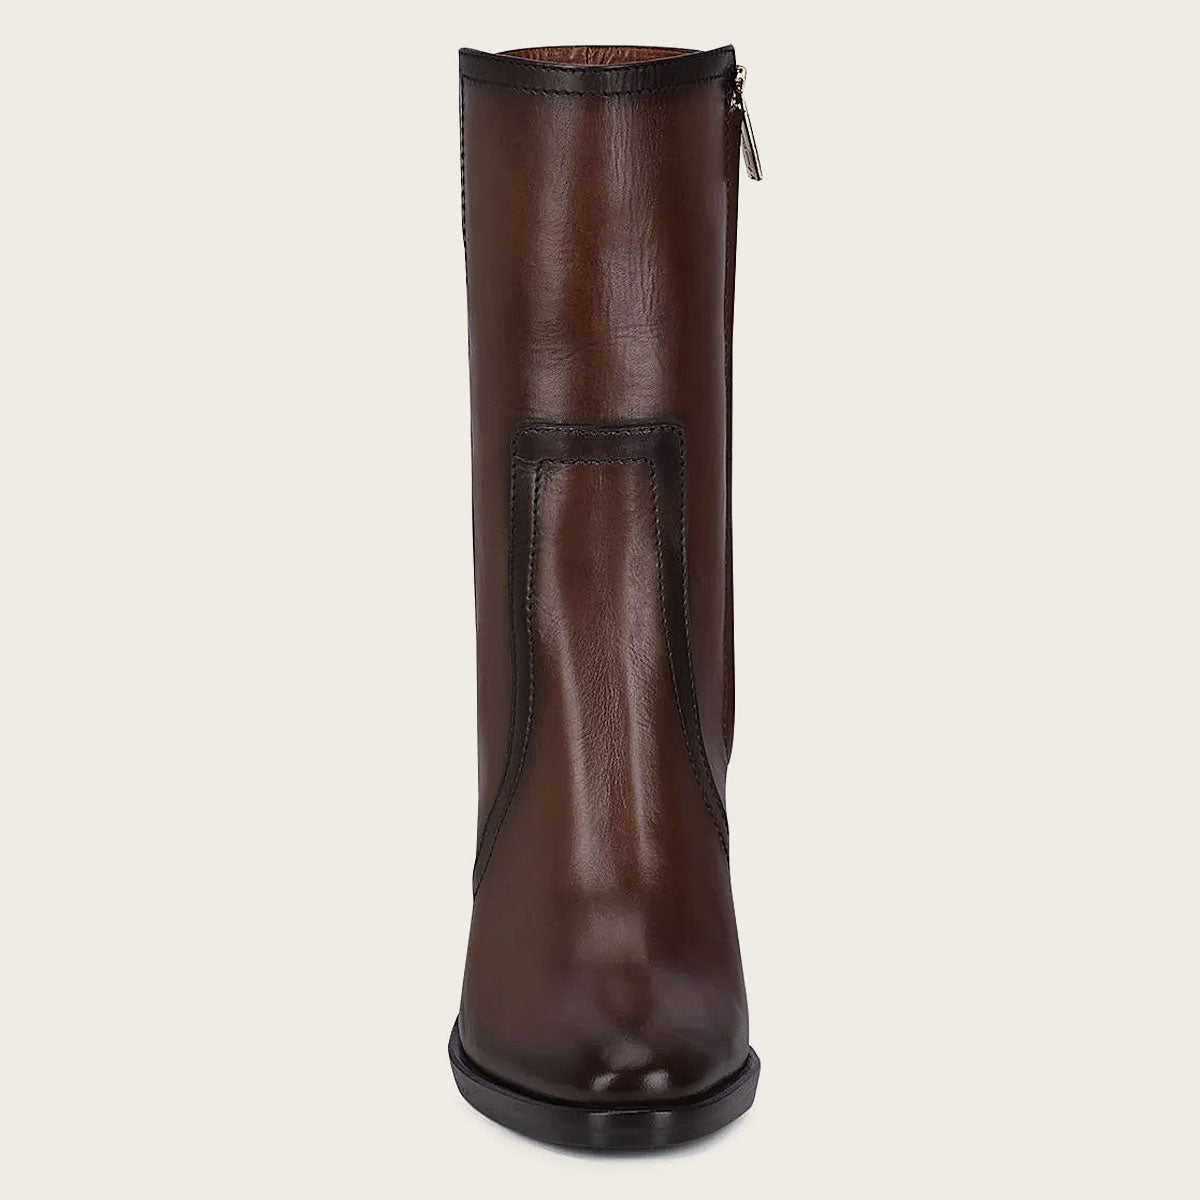 Brown leather bootie with metallic symbol on side. Smooth, polished leather, block heel, high ankle shaft, intricate design.